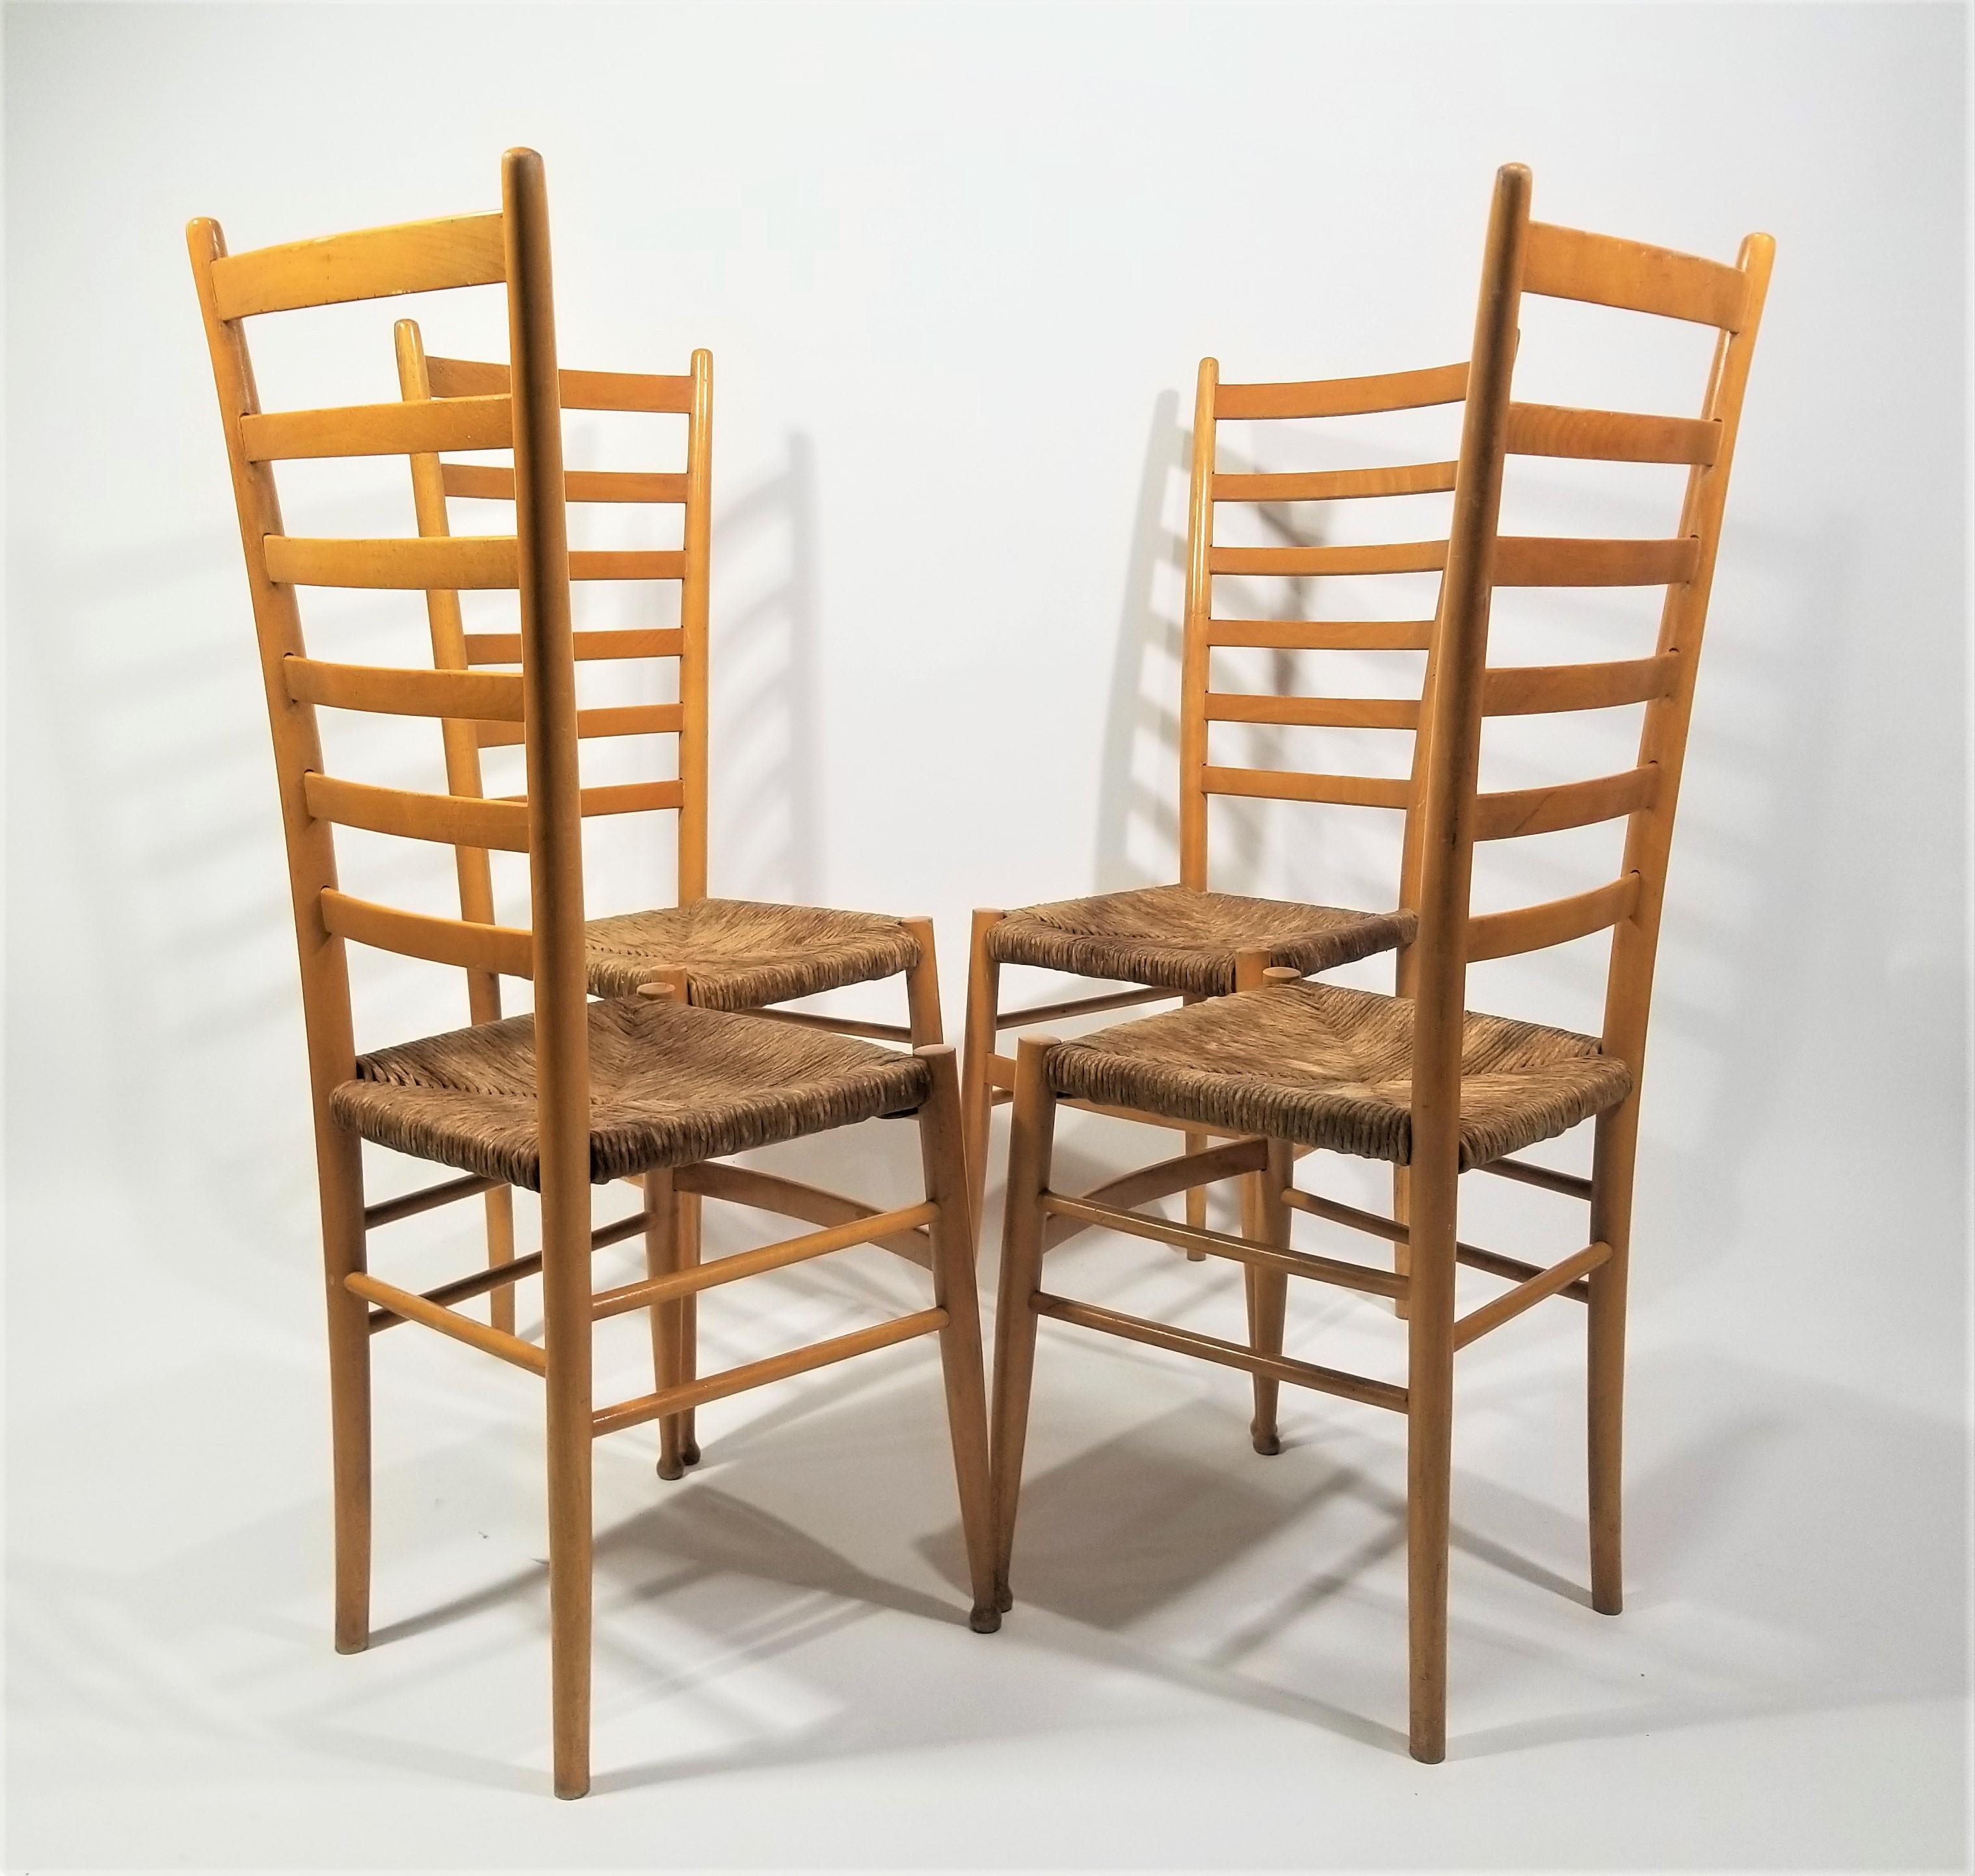 Italian Gio  Ponti Style Tall Ladder Back Chairs 1970s Made in Italy  In Good Condition For Sale In New York, NY